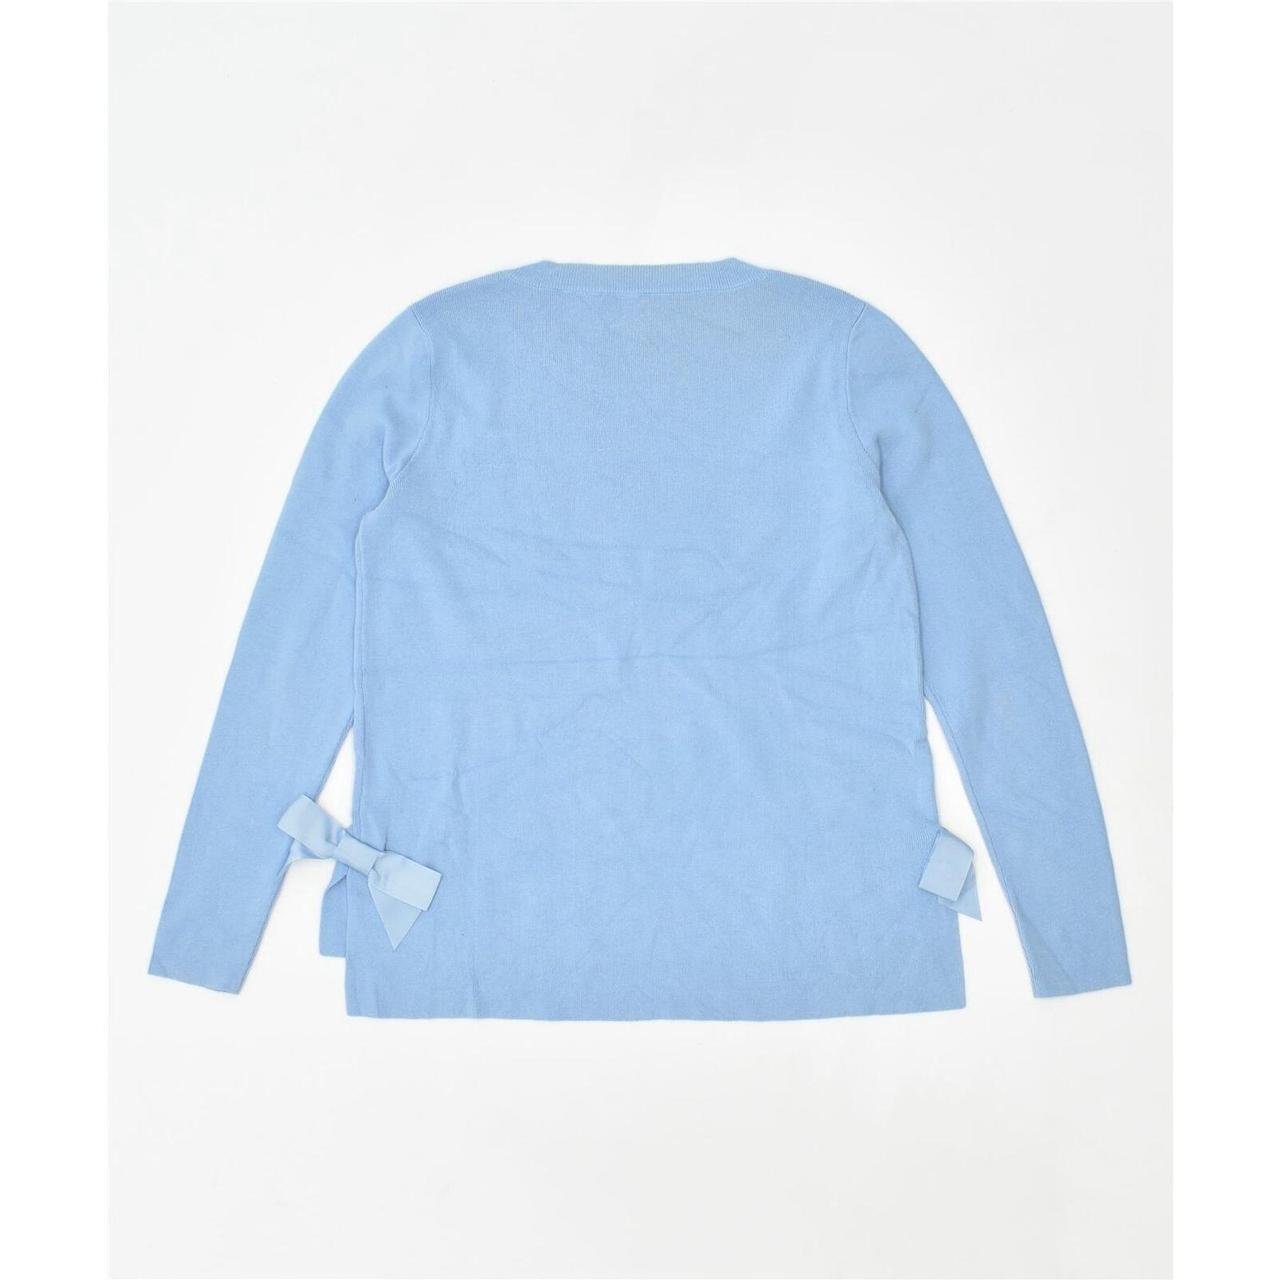 Product Image 2 - OASIS Womens Crew Neck Jumper